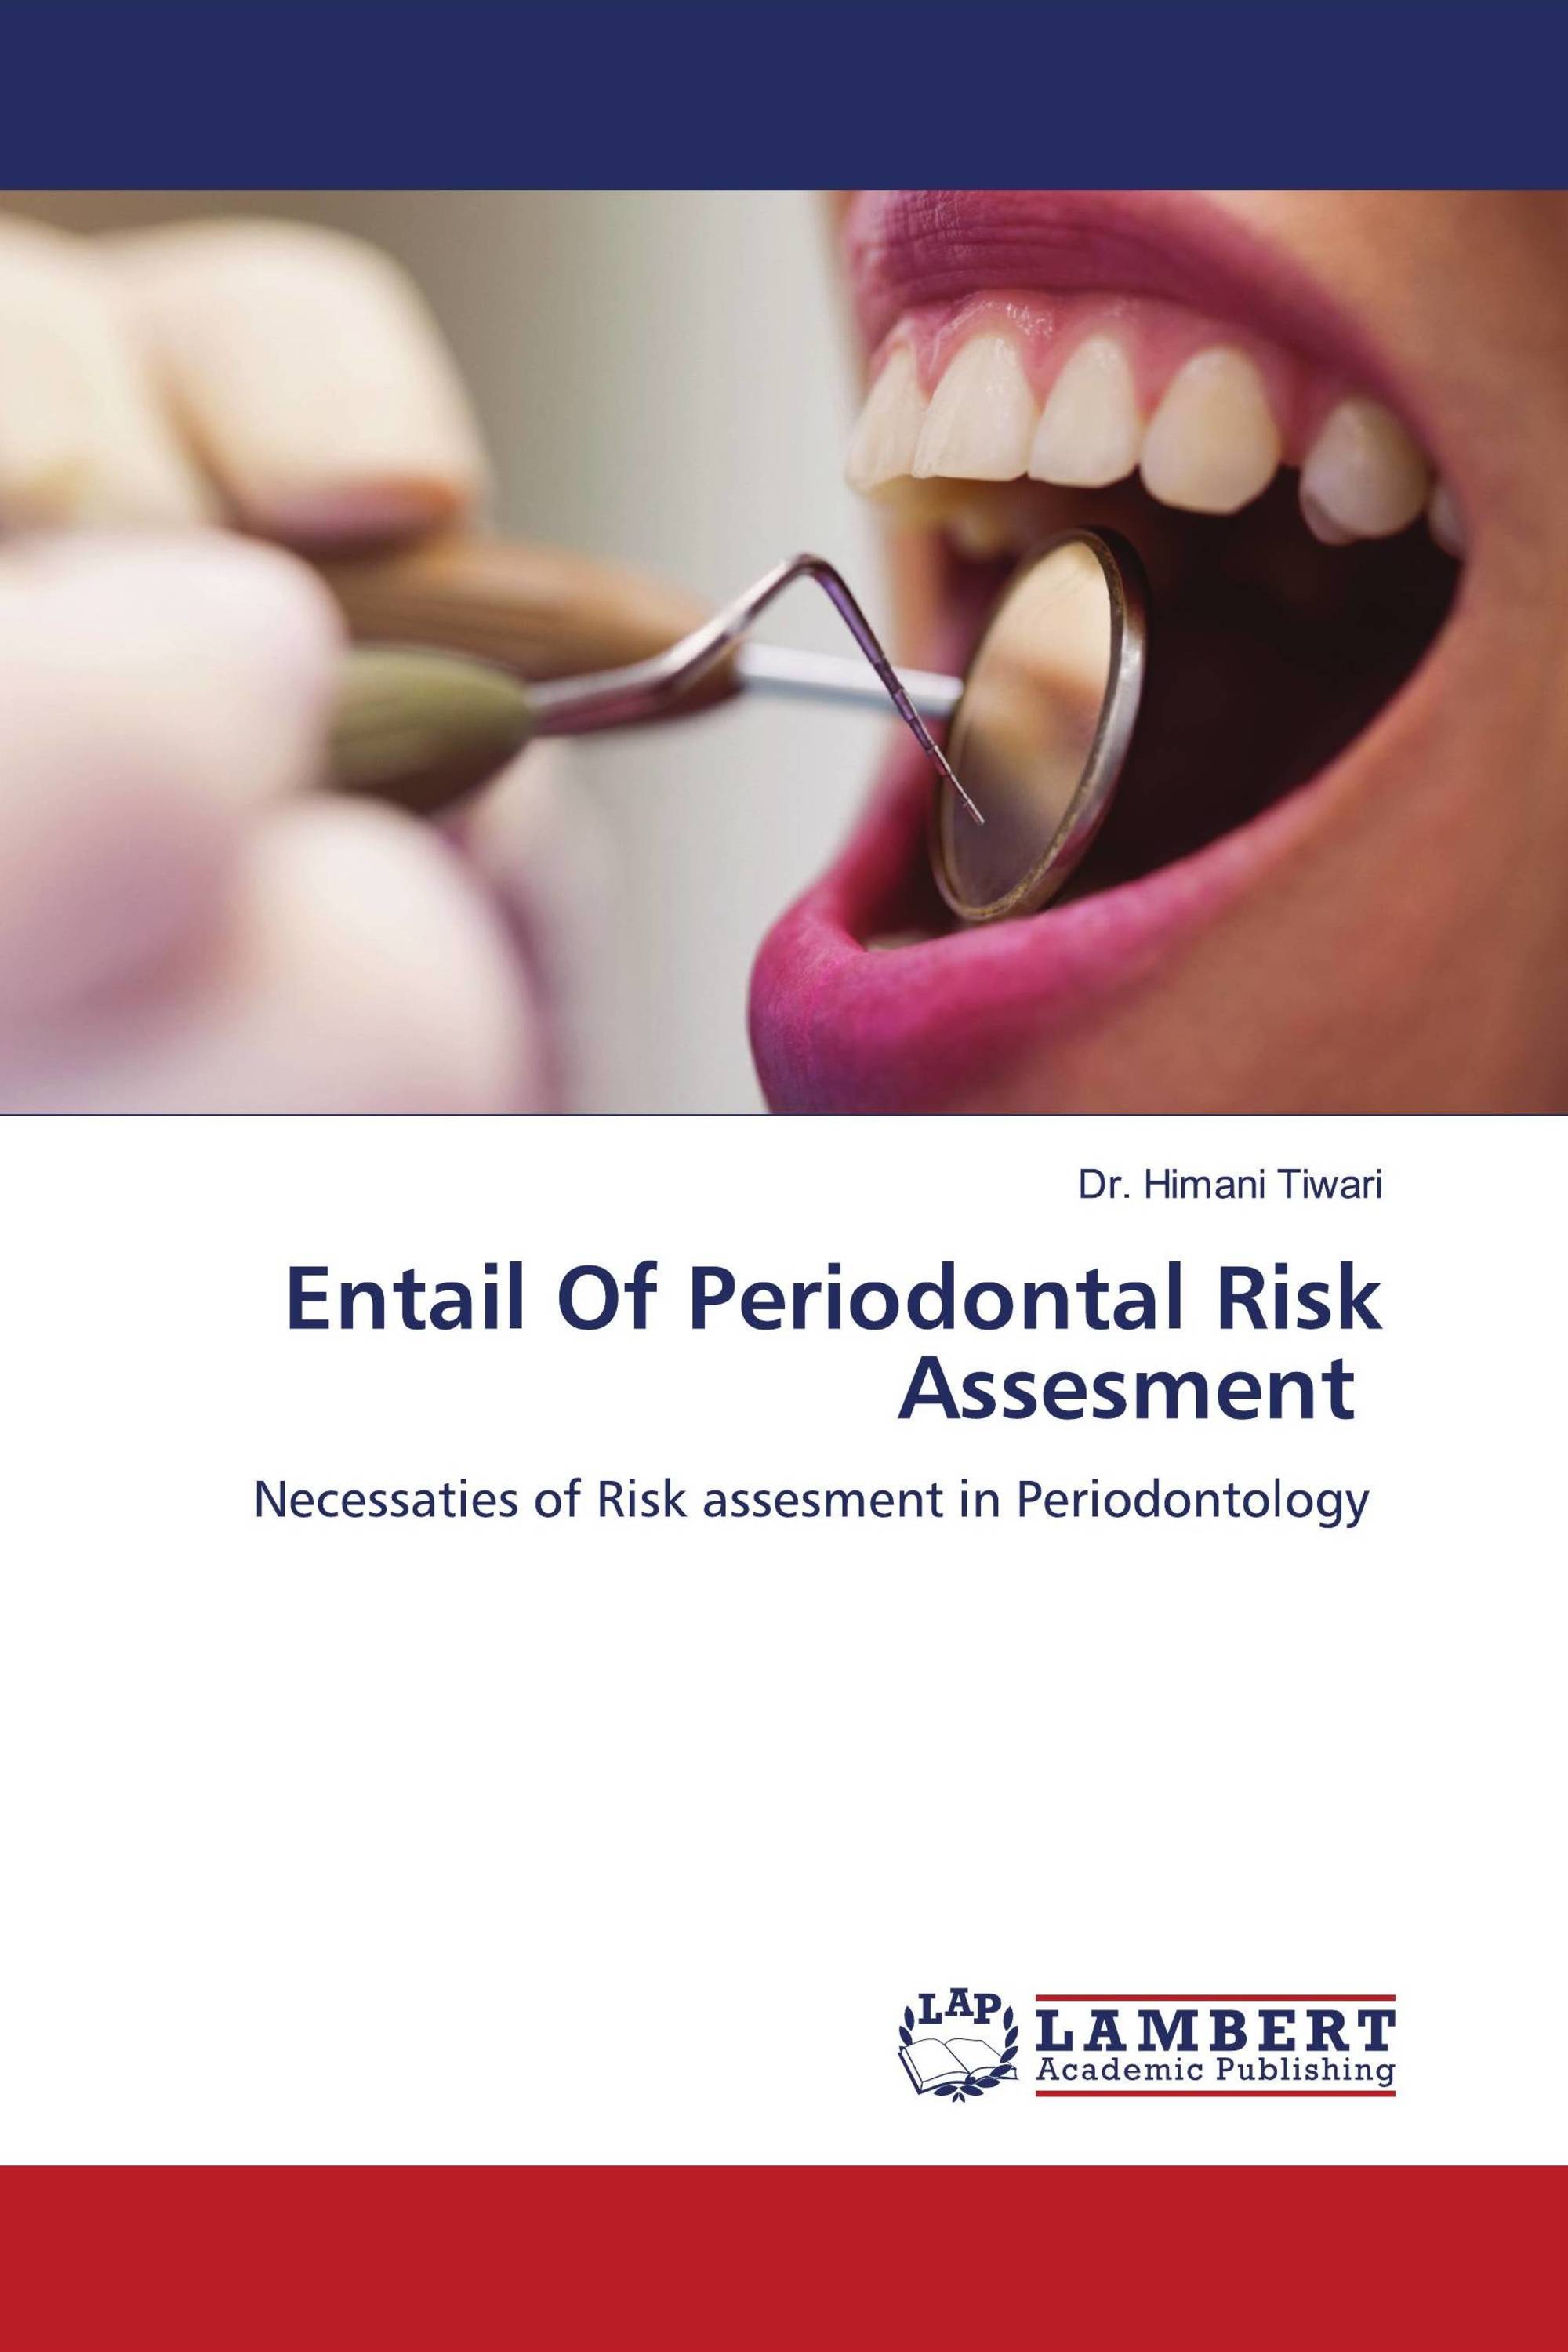 Entail Of Periodontal Risk Assesment